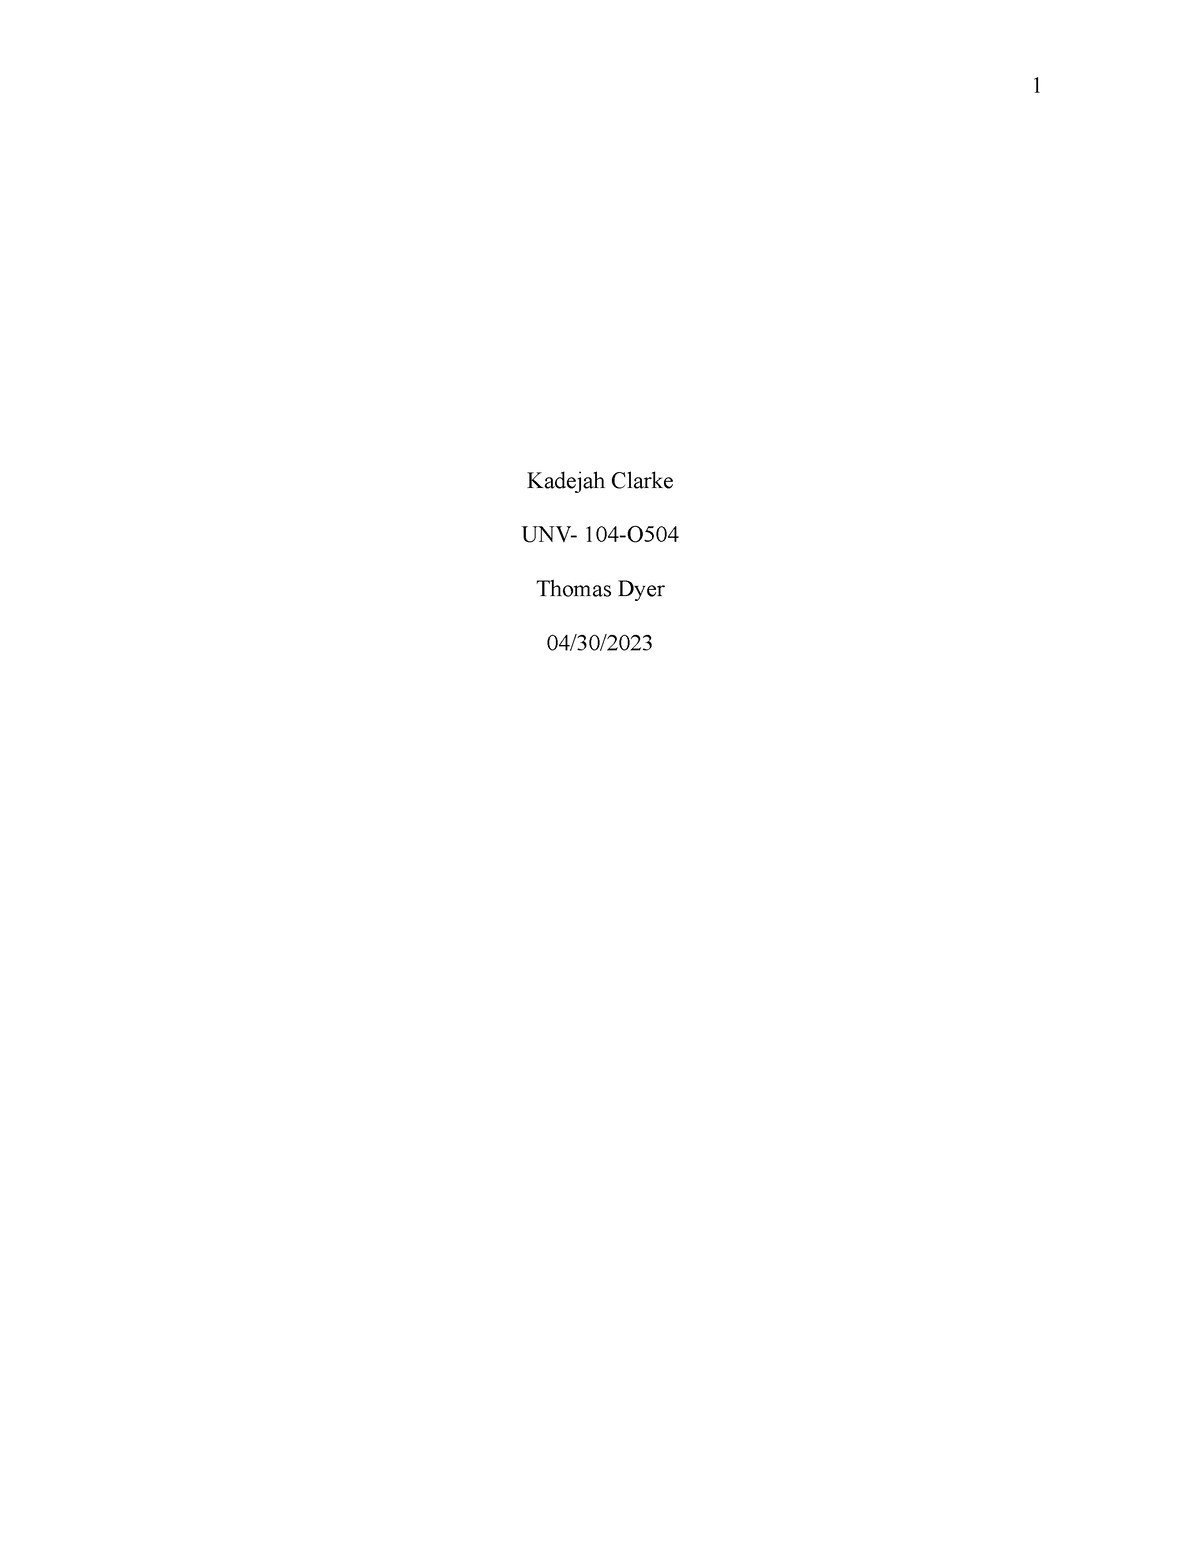 final draft expository essay unv 104